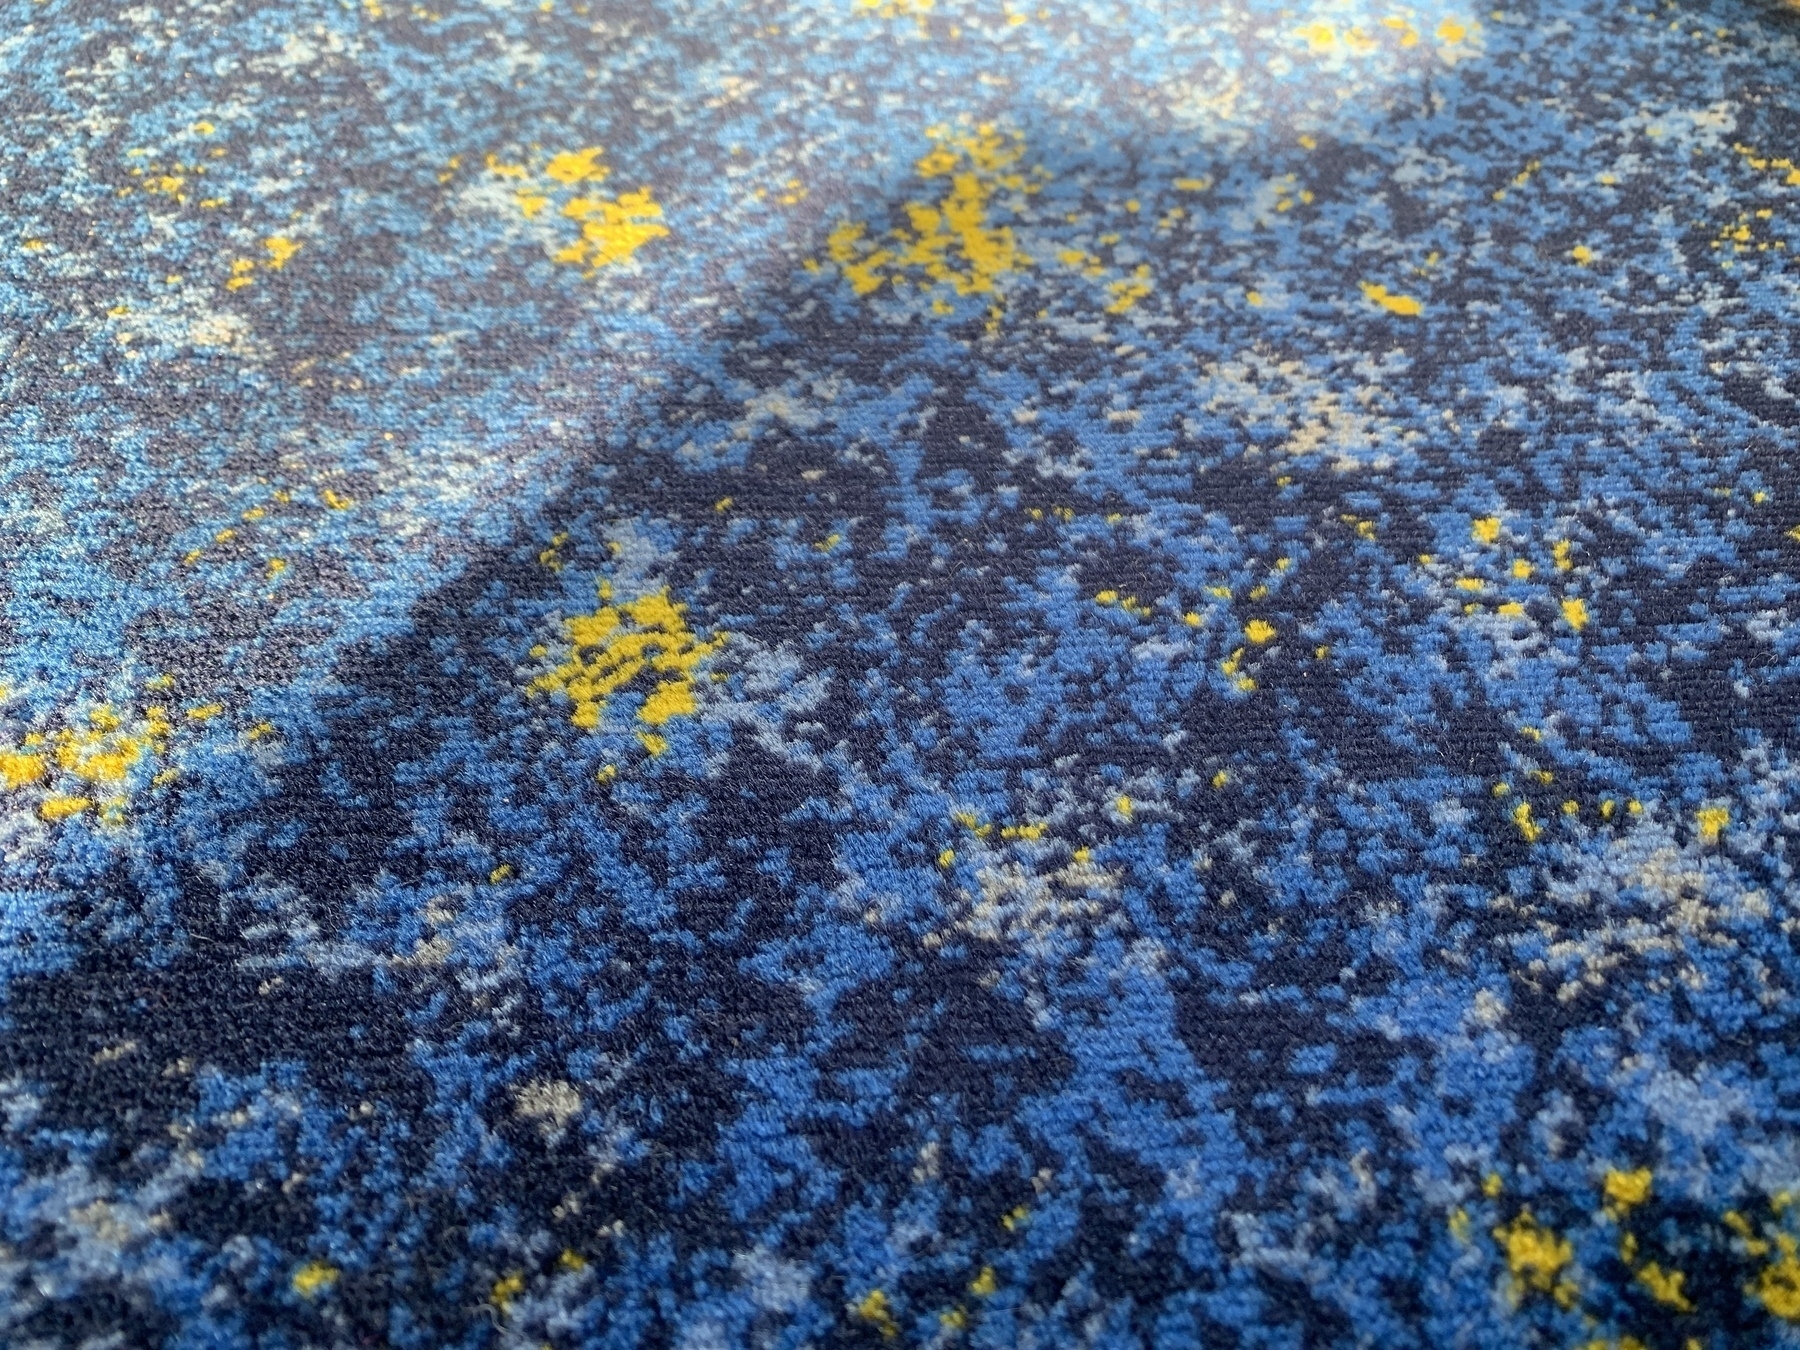 Fabric train seat cover in a mottled design mixing 4 shades of blue and some yellow, partially in shadow, partially in bright sun.